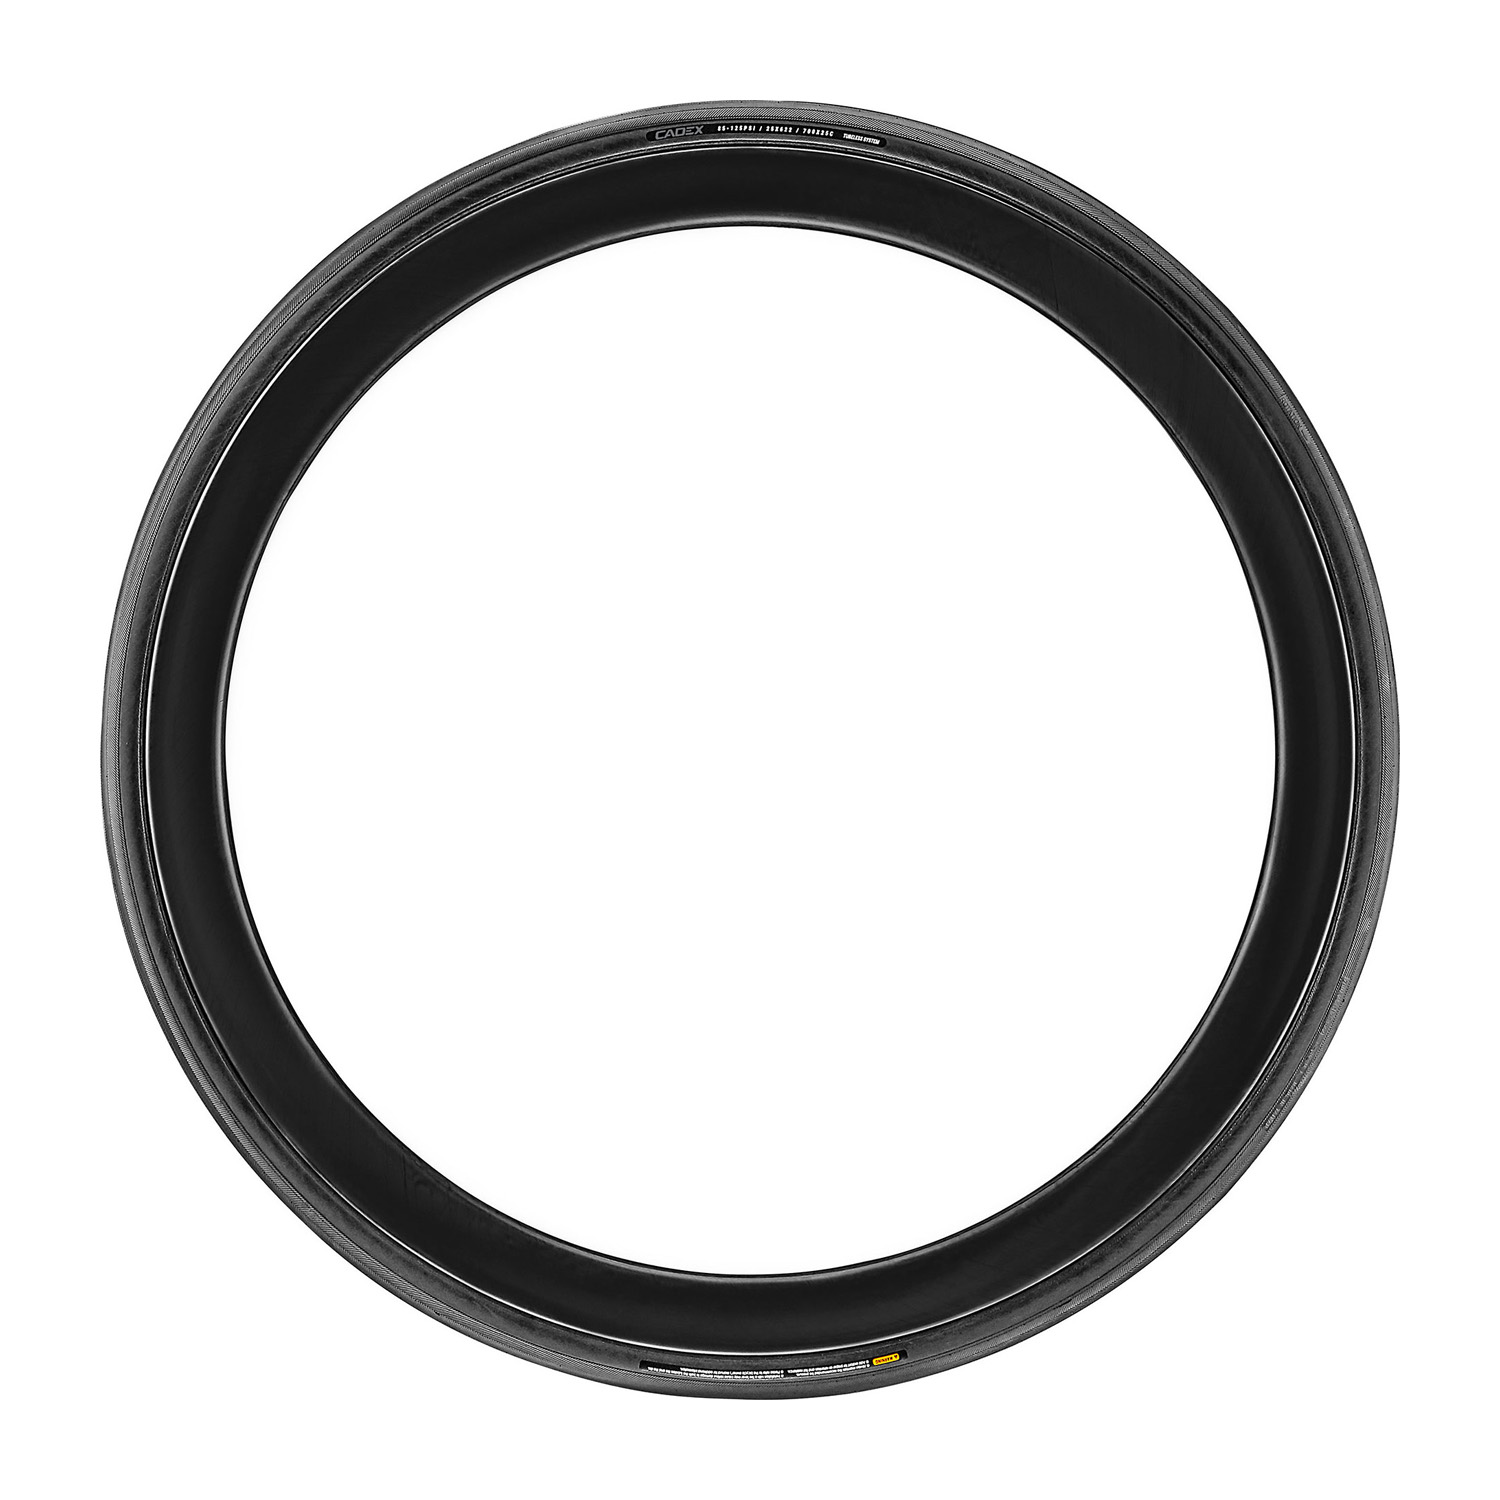 Cadex Race tubeless racefiets band